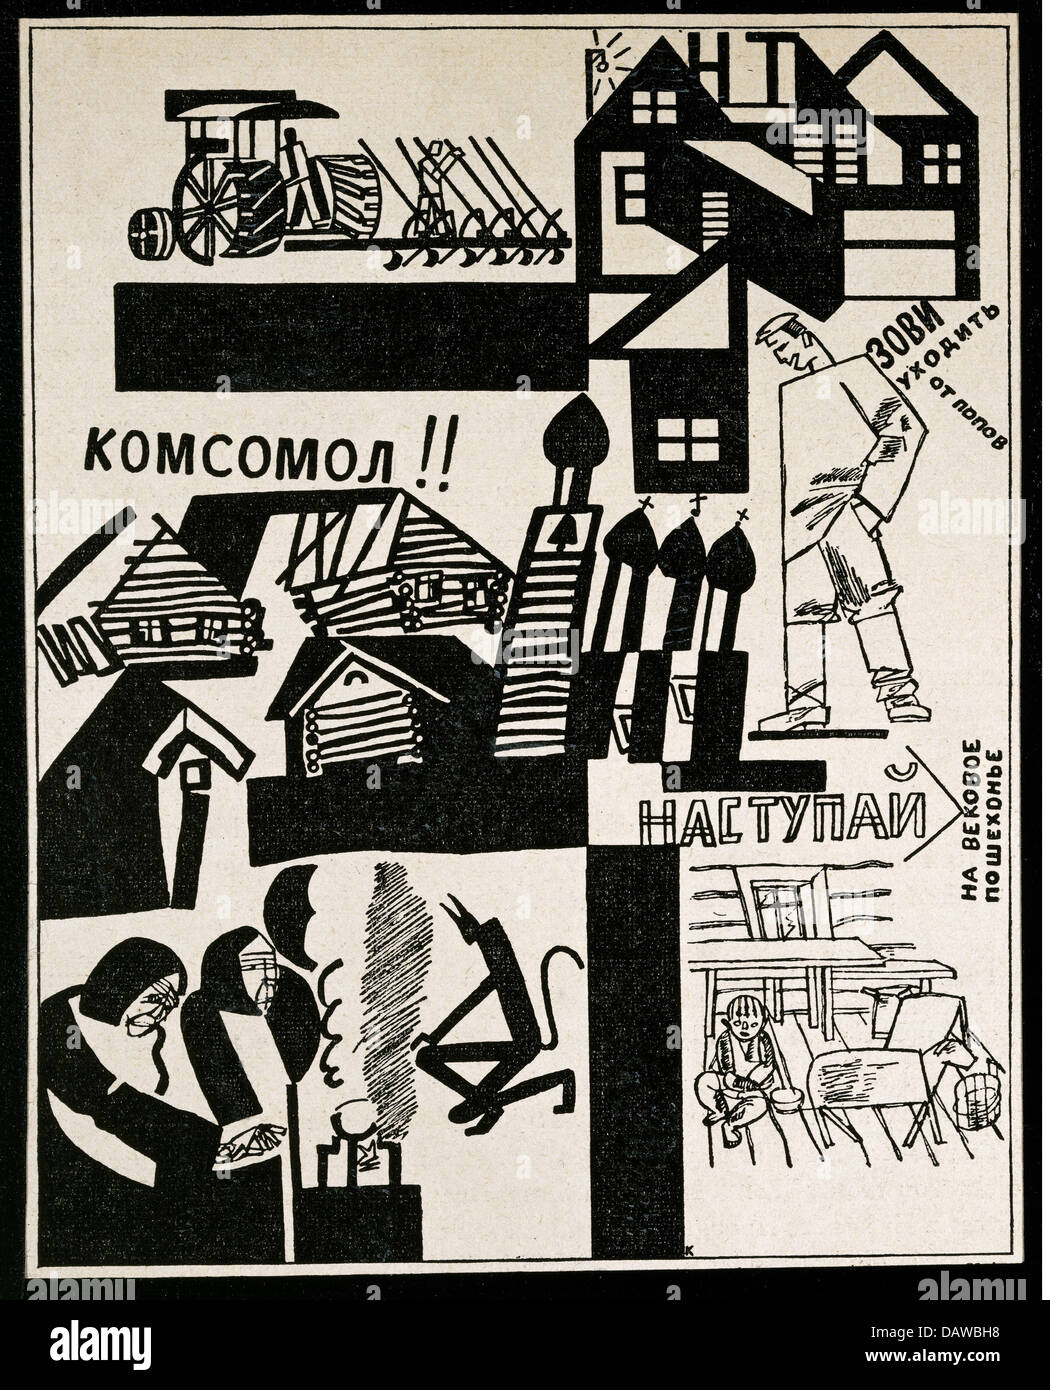 geography / travel, Russia, politics, propaganda, advertising poster of the Komsomol (Communist Union of Youth), by V. Krimski, early 1920s, Additional-Rights-Clearences-Not Available Stock Photo